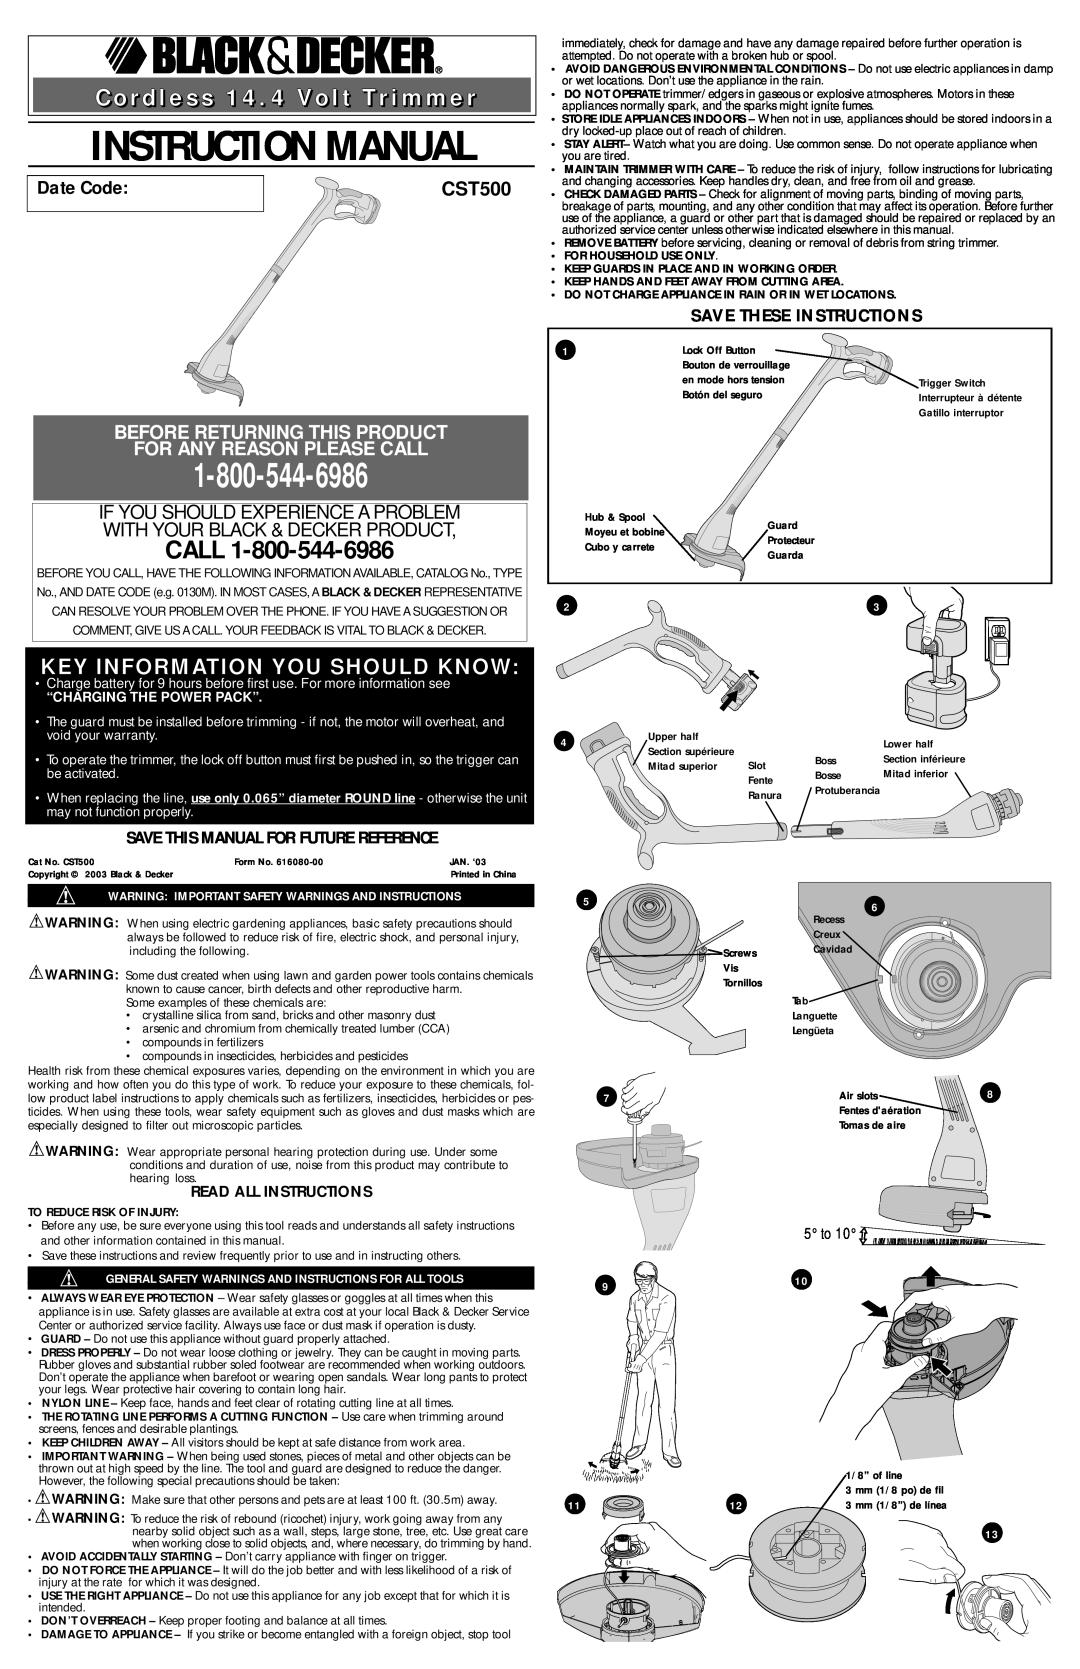 Black & Decker 616080-00 instruction manual Save This Manual For Future Reference, Read All Instructions, Call, Date Code 